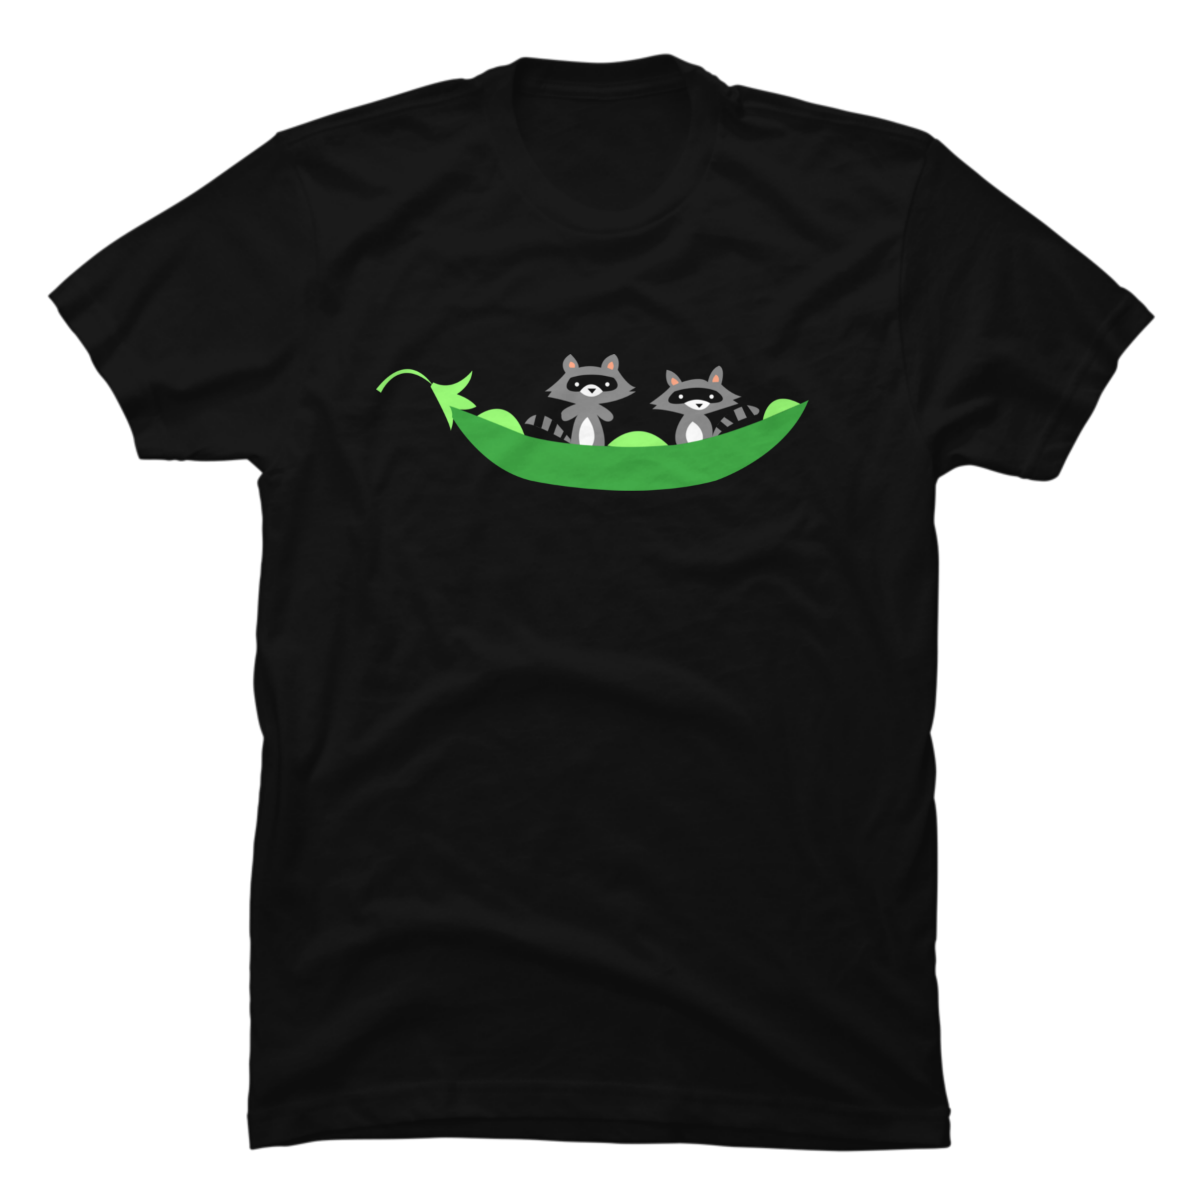 two peas in a pod t shirt